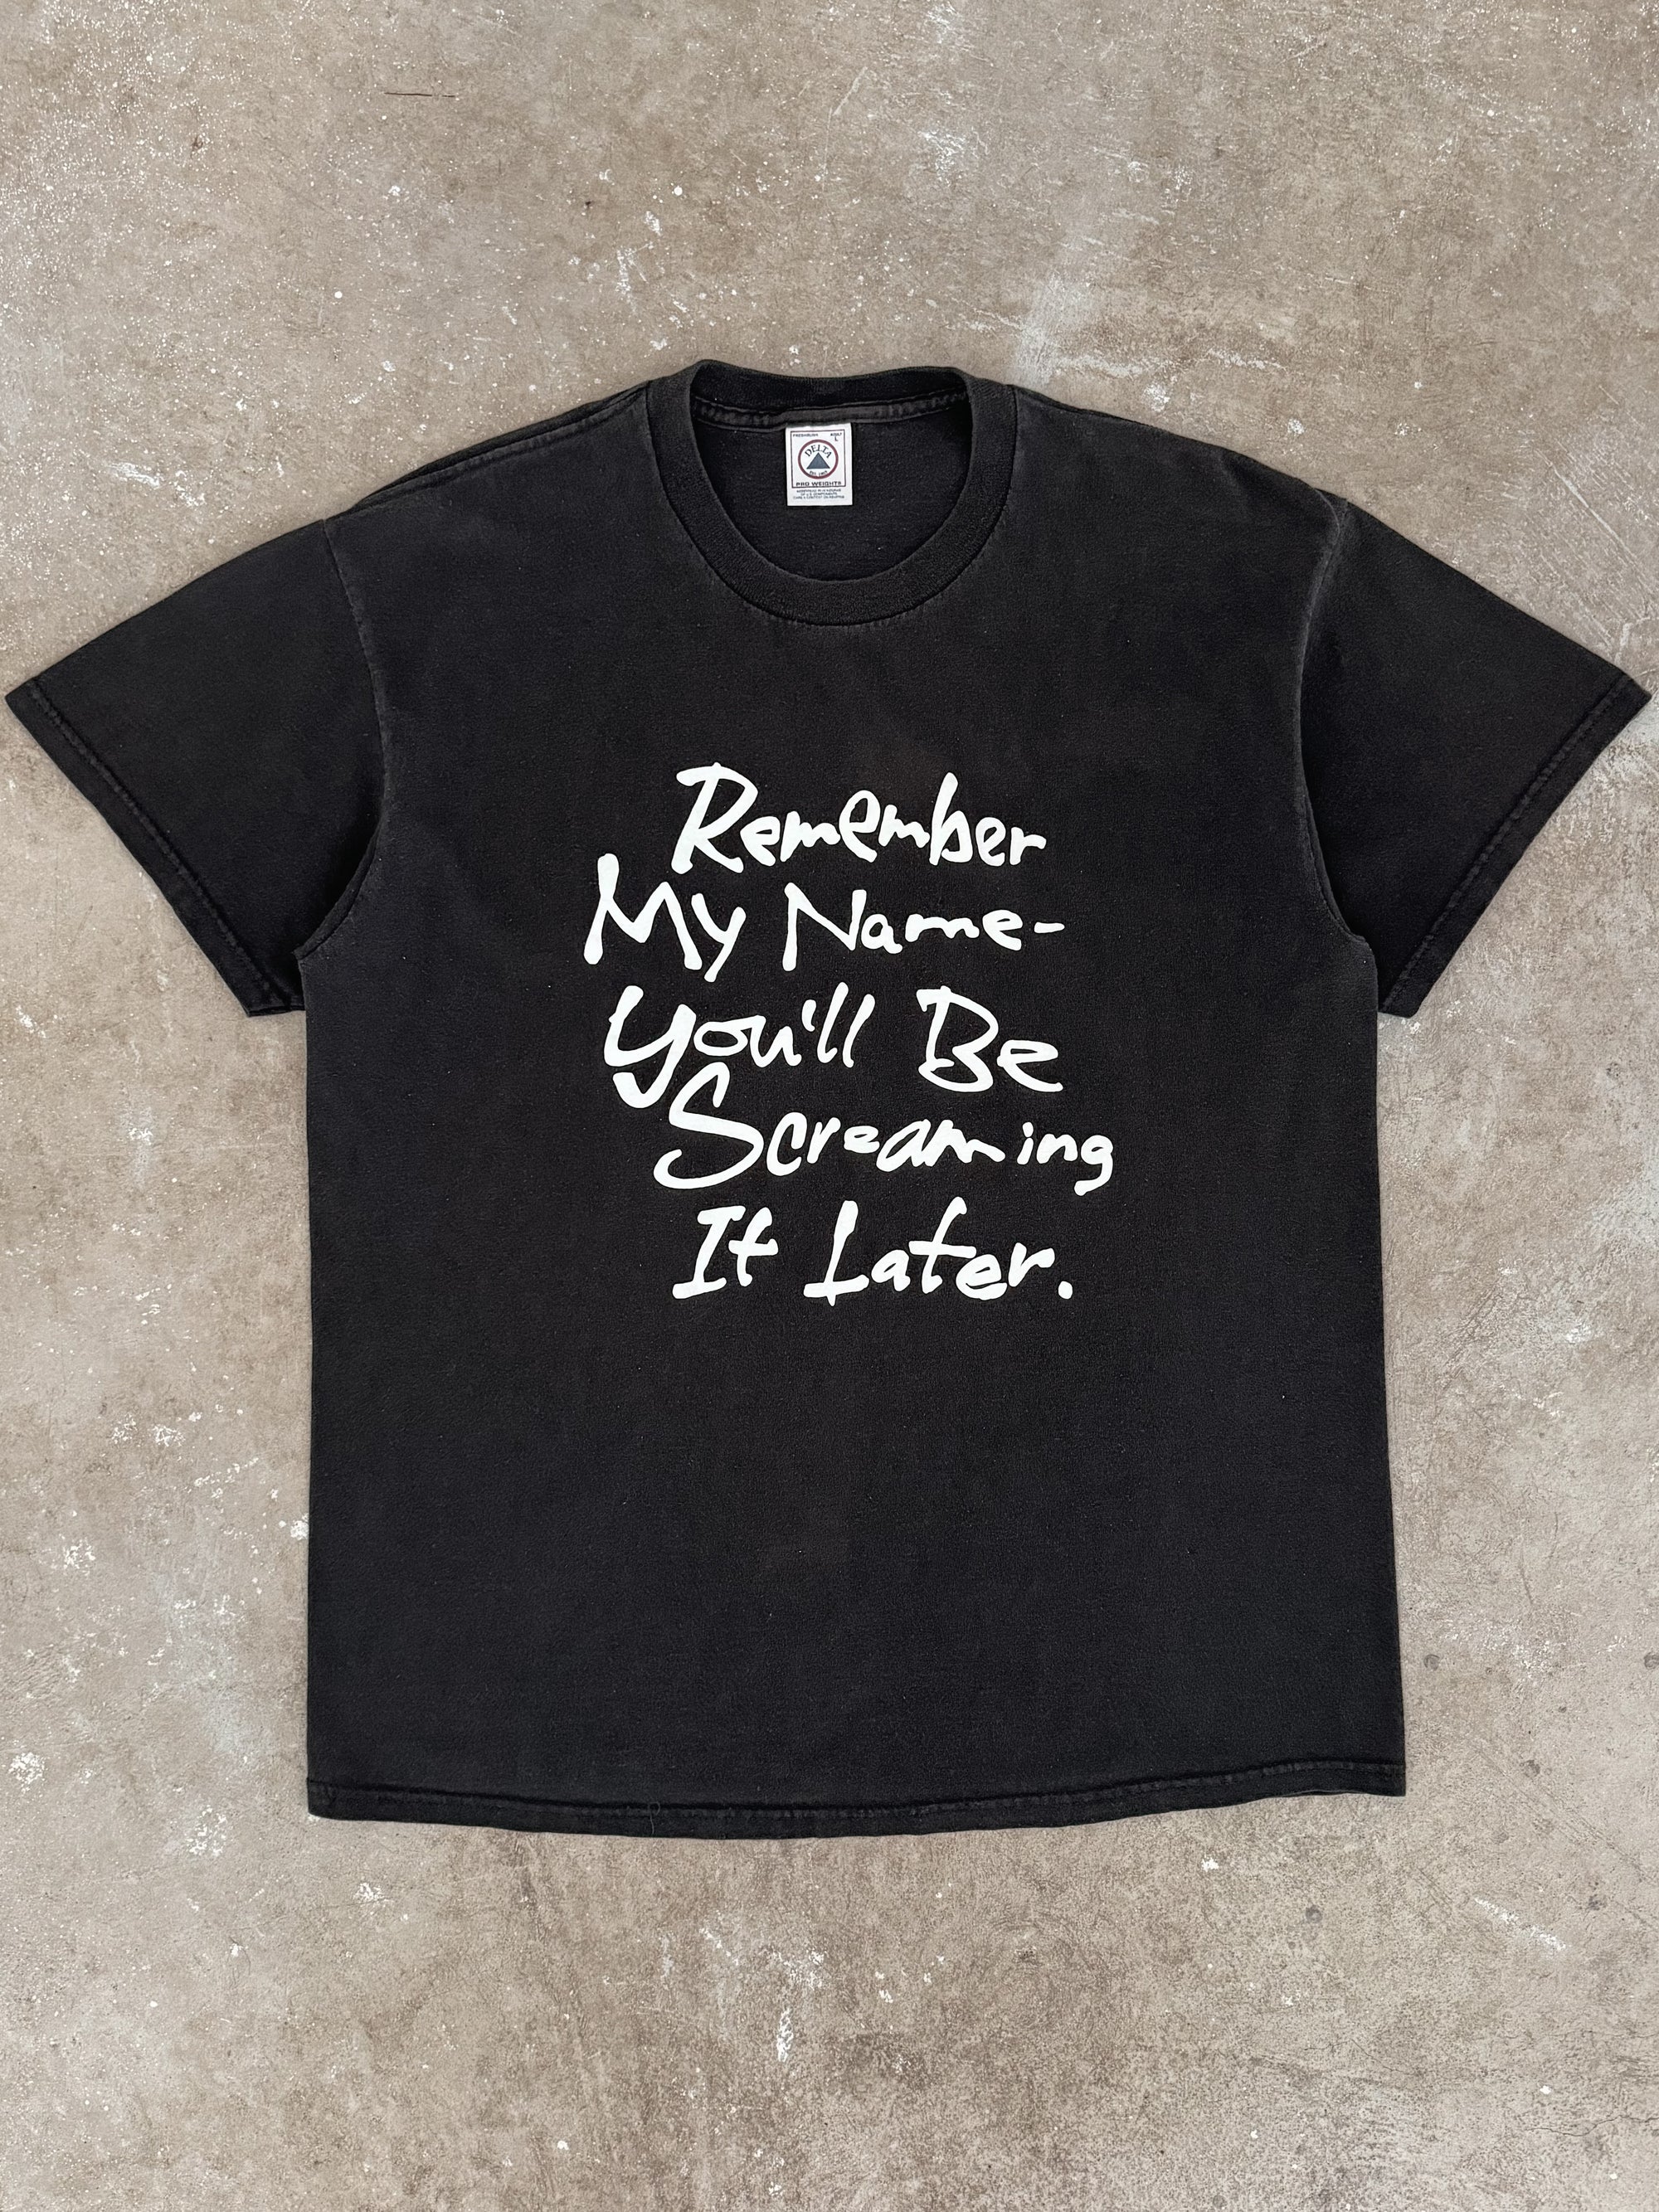 1990s "Remember My Name" Tee (L)